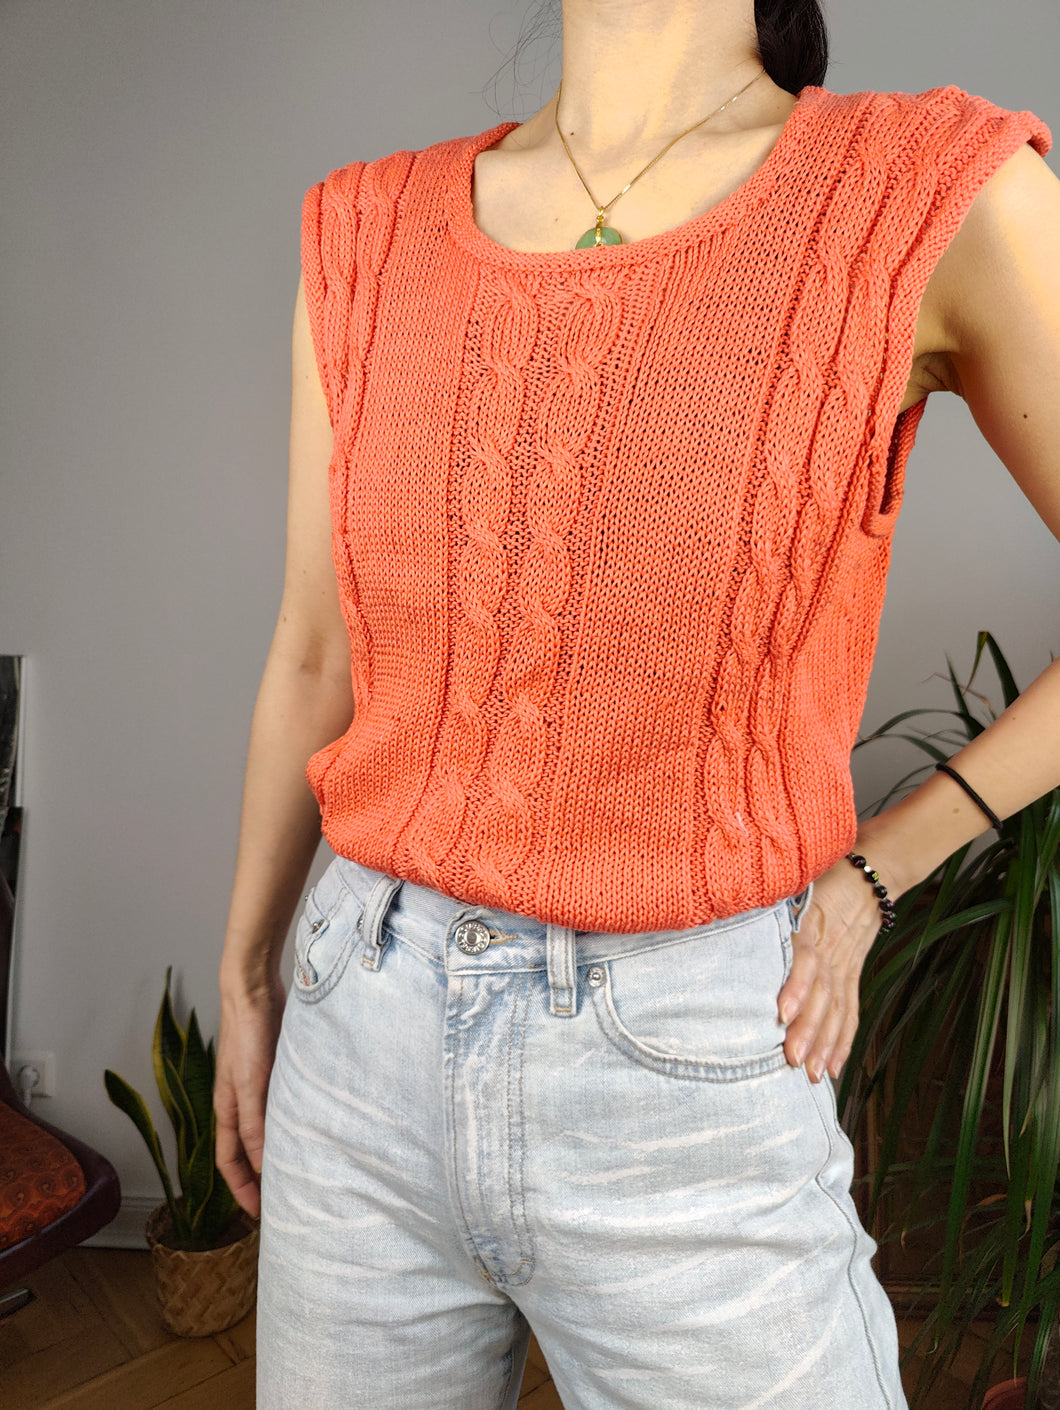 Vintage crochet top orange sleeveless cable knit knitted women S